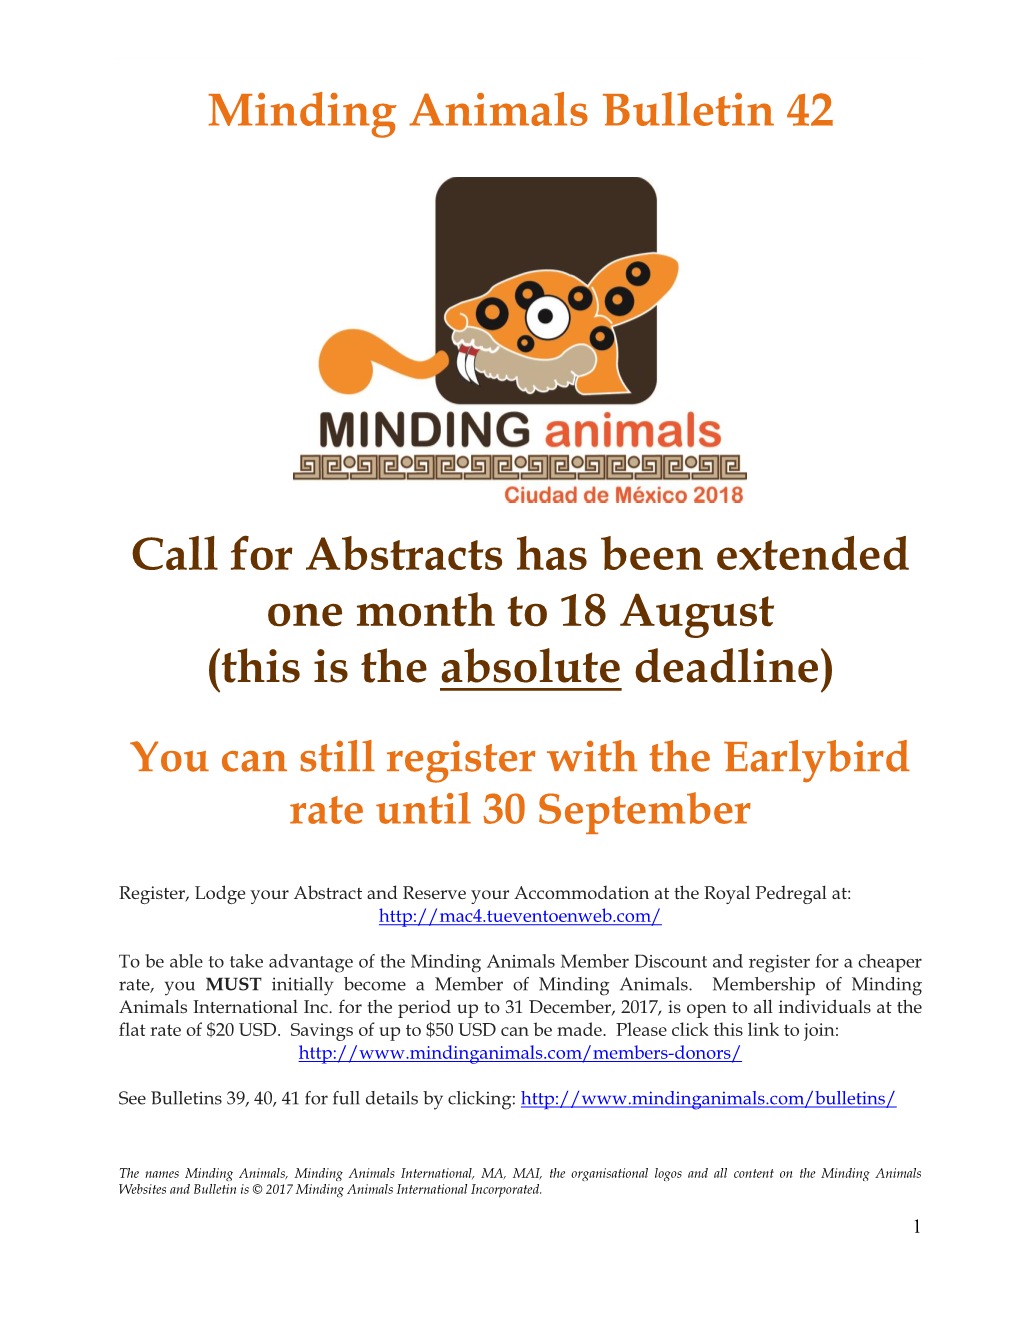 Minding Animals Bulletin 42 Call for Abstracts Has Been Extended One